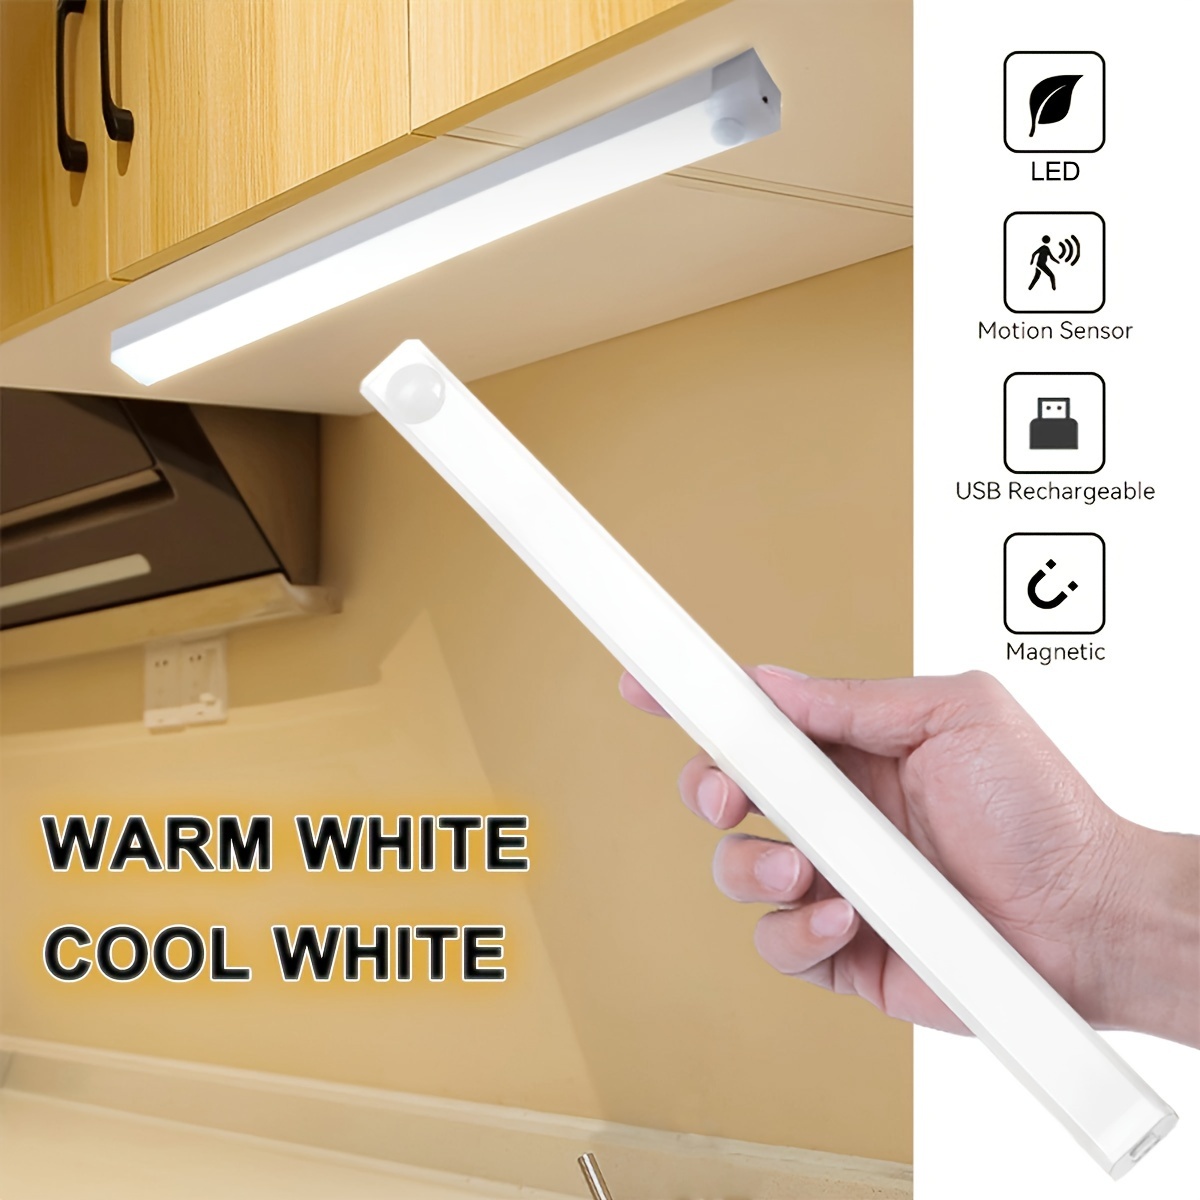 

Motion Sensor Led Lights, Battery Operated Under Cabinet Lights, Stick-on Anywhere Magnetic Closet Lights Warm White, For Bedroom Closet, Cabinet, Safe, Hallway, Stairway, Kitchen, Pantry